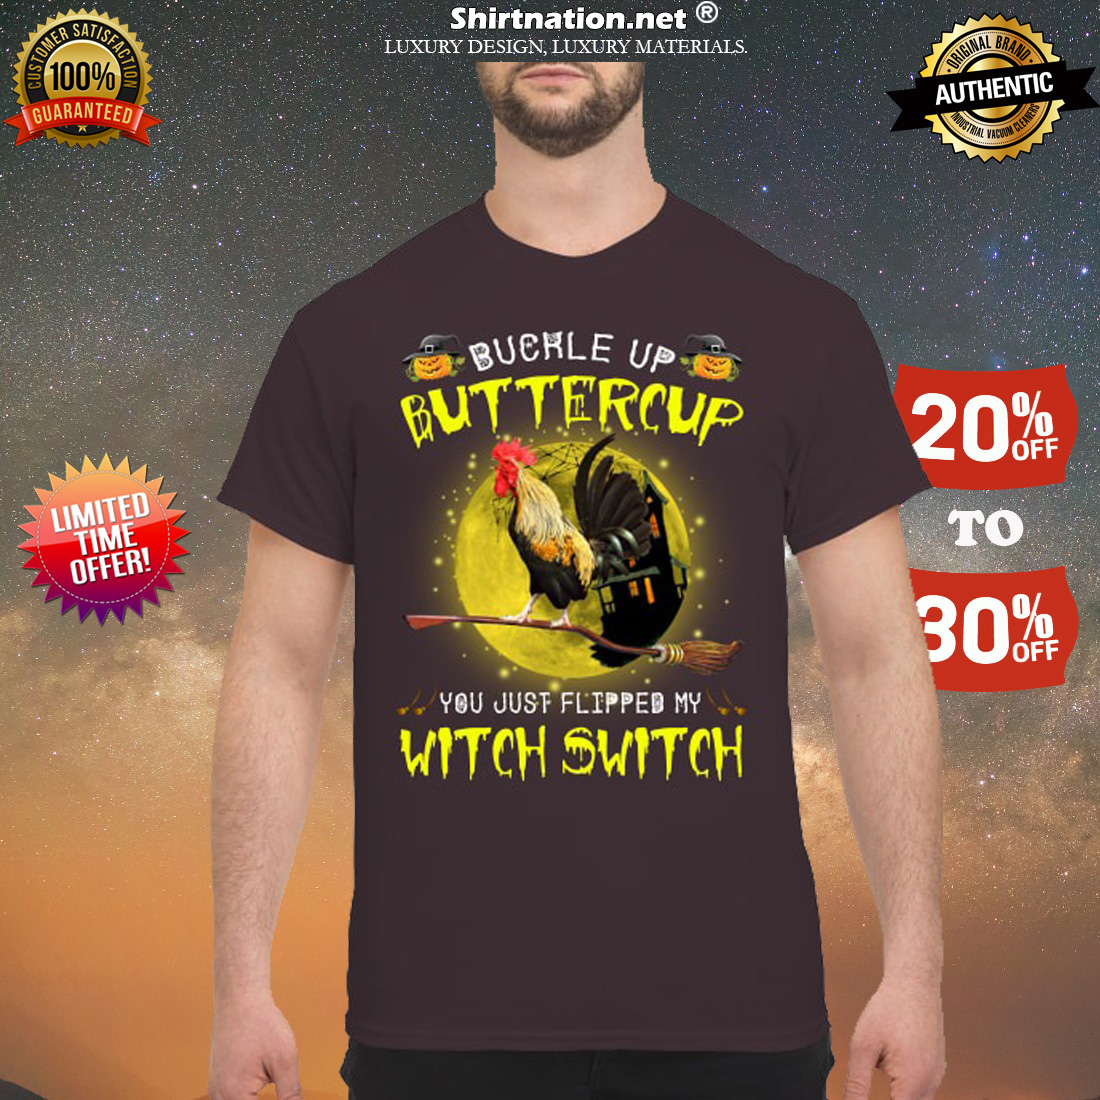 Chicken buckle up buttercup you just flipped my witch switch classic shirt